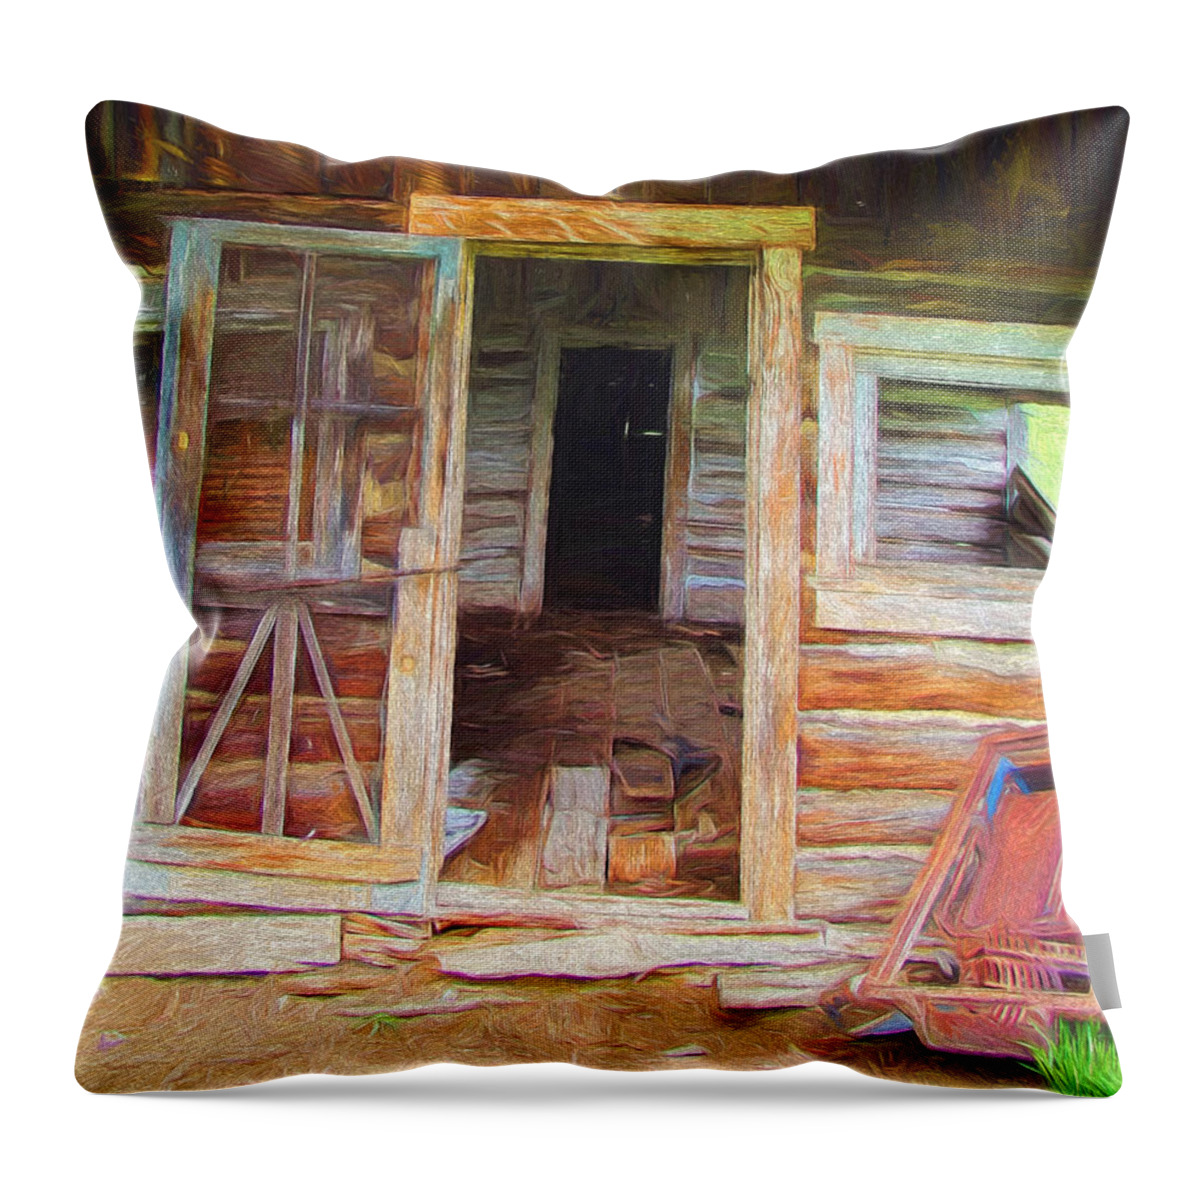  Throw Pillow featuring the digital art Walking through it by Cathy Anderson